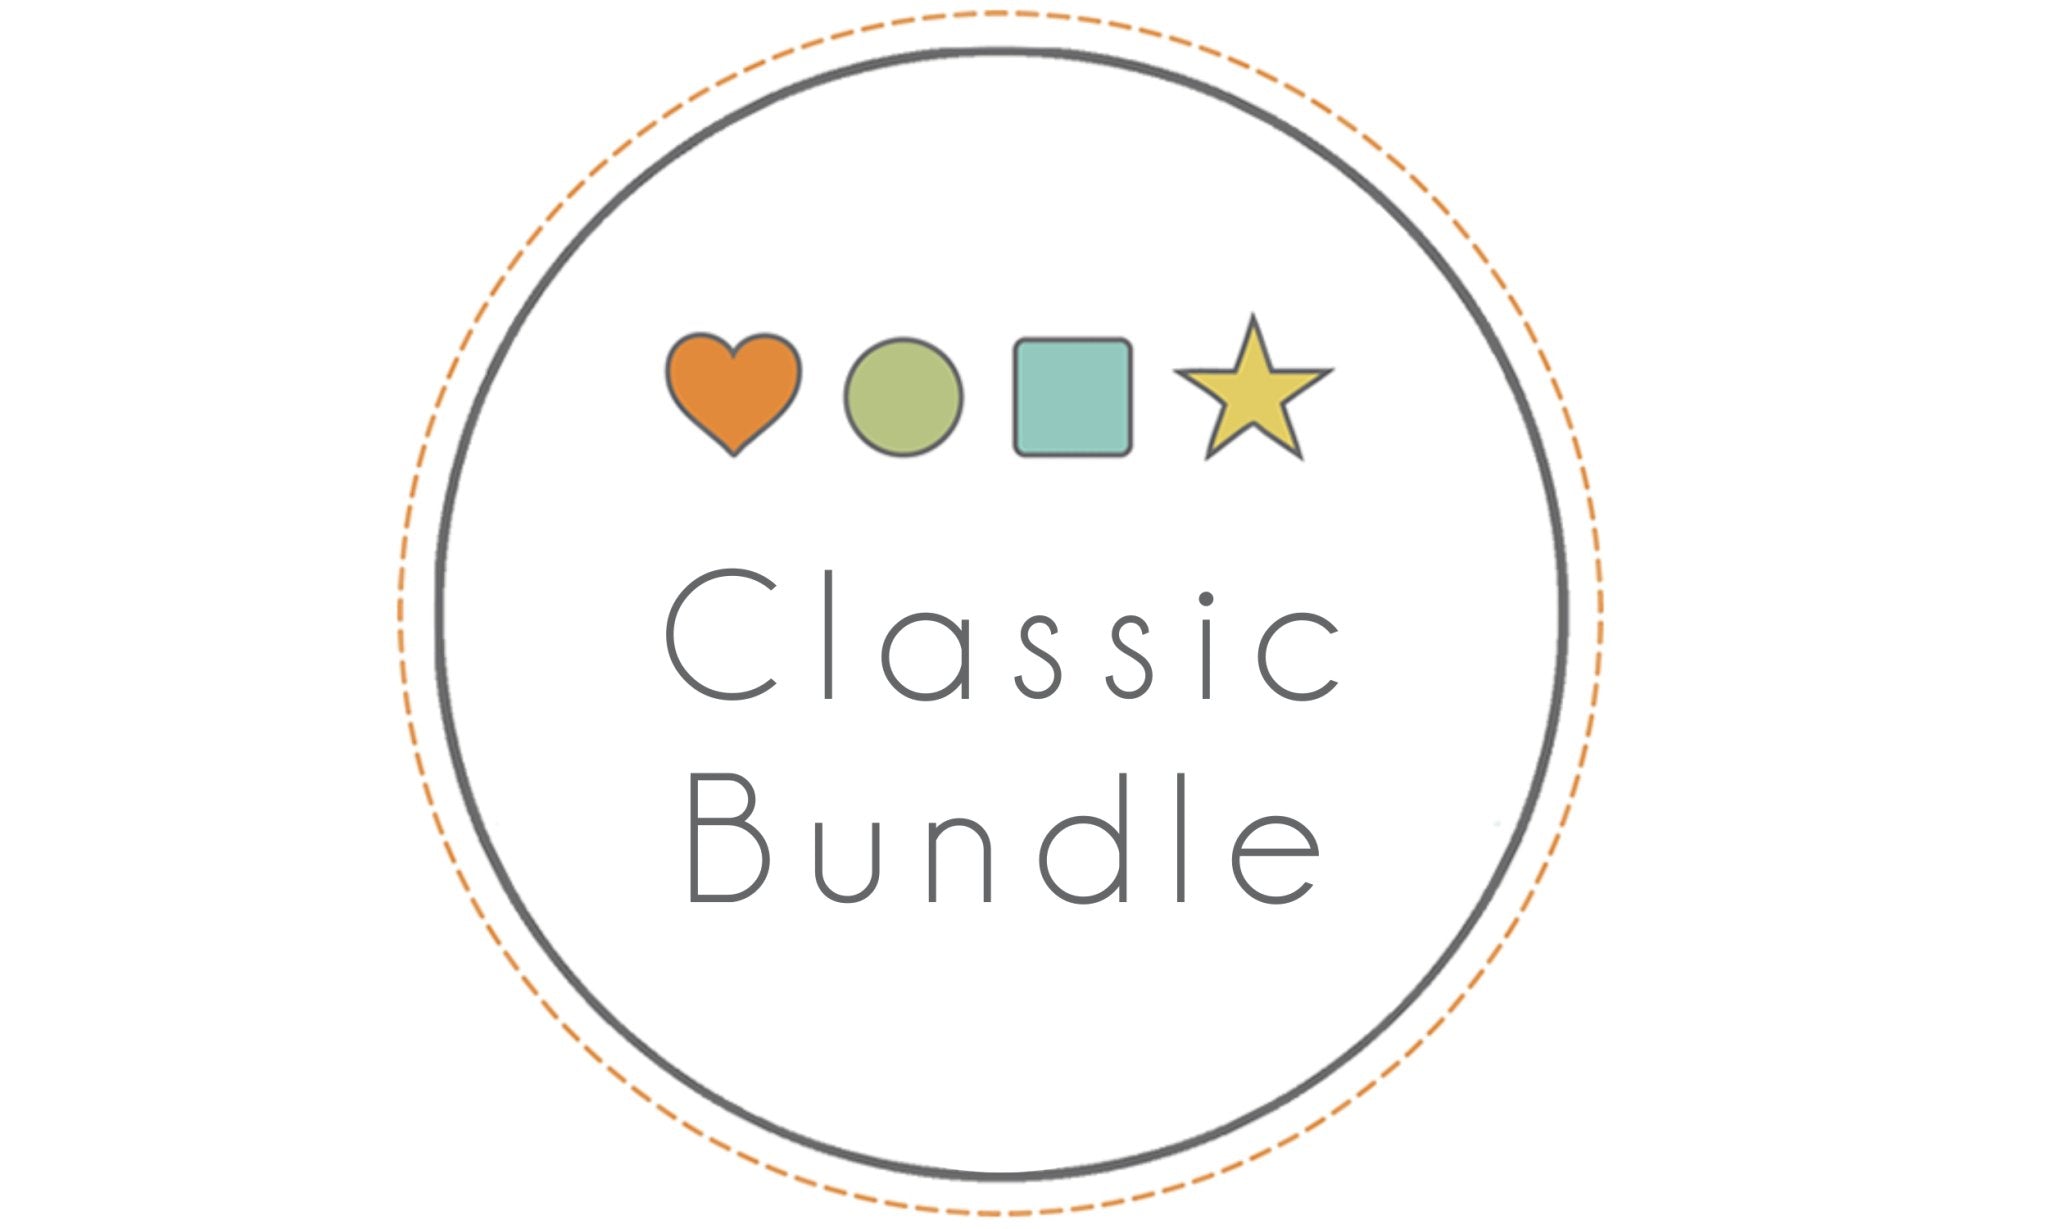 Classic Rattle + Teether Bundle Set - Bannor Toys